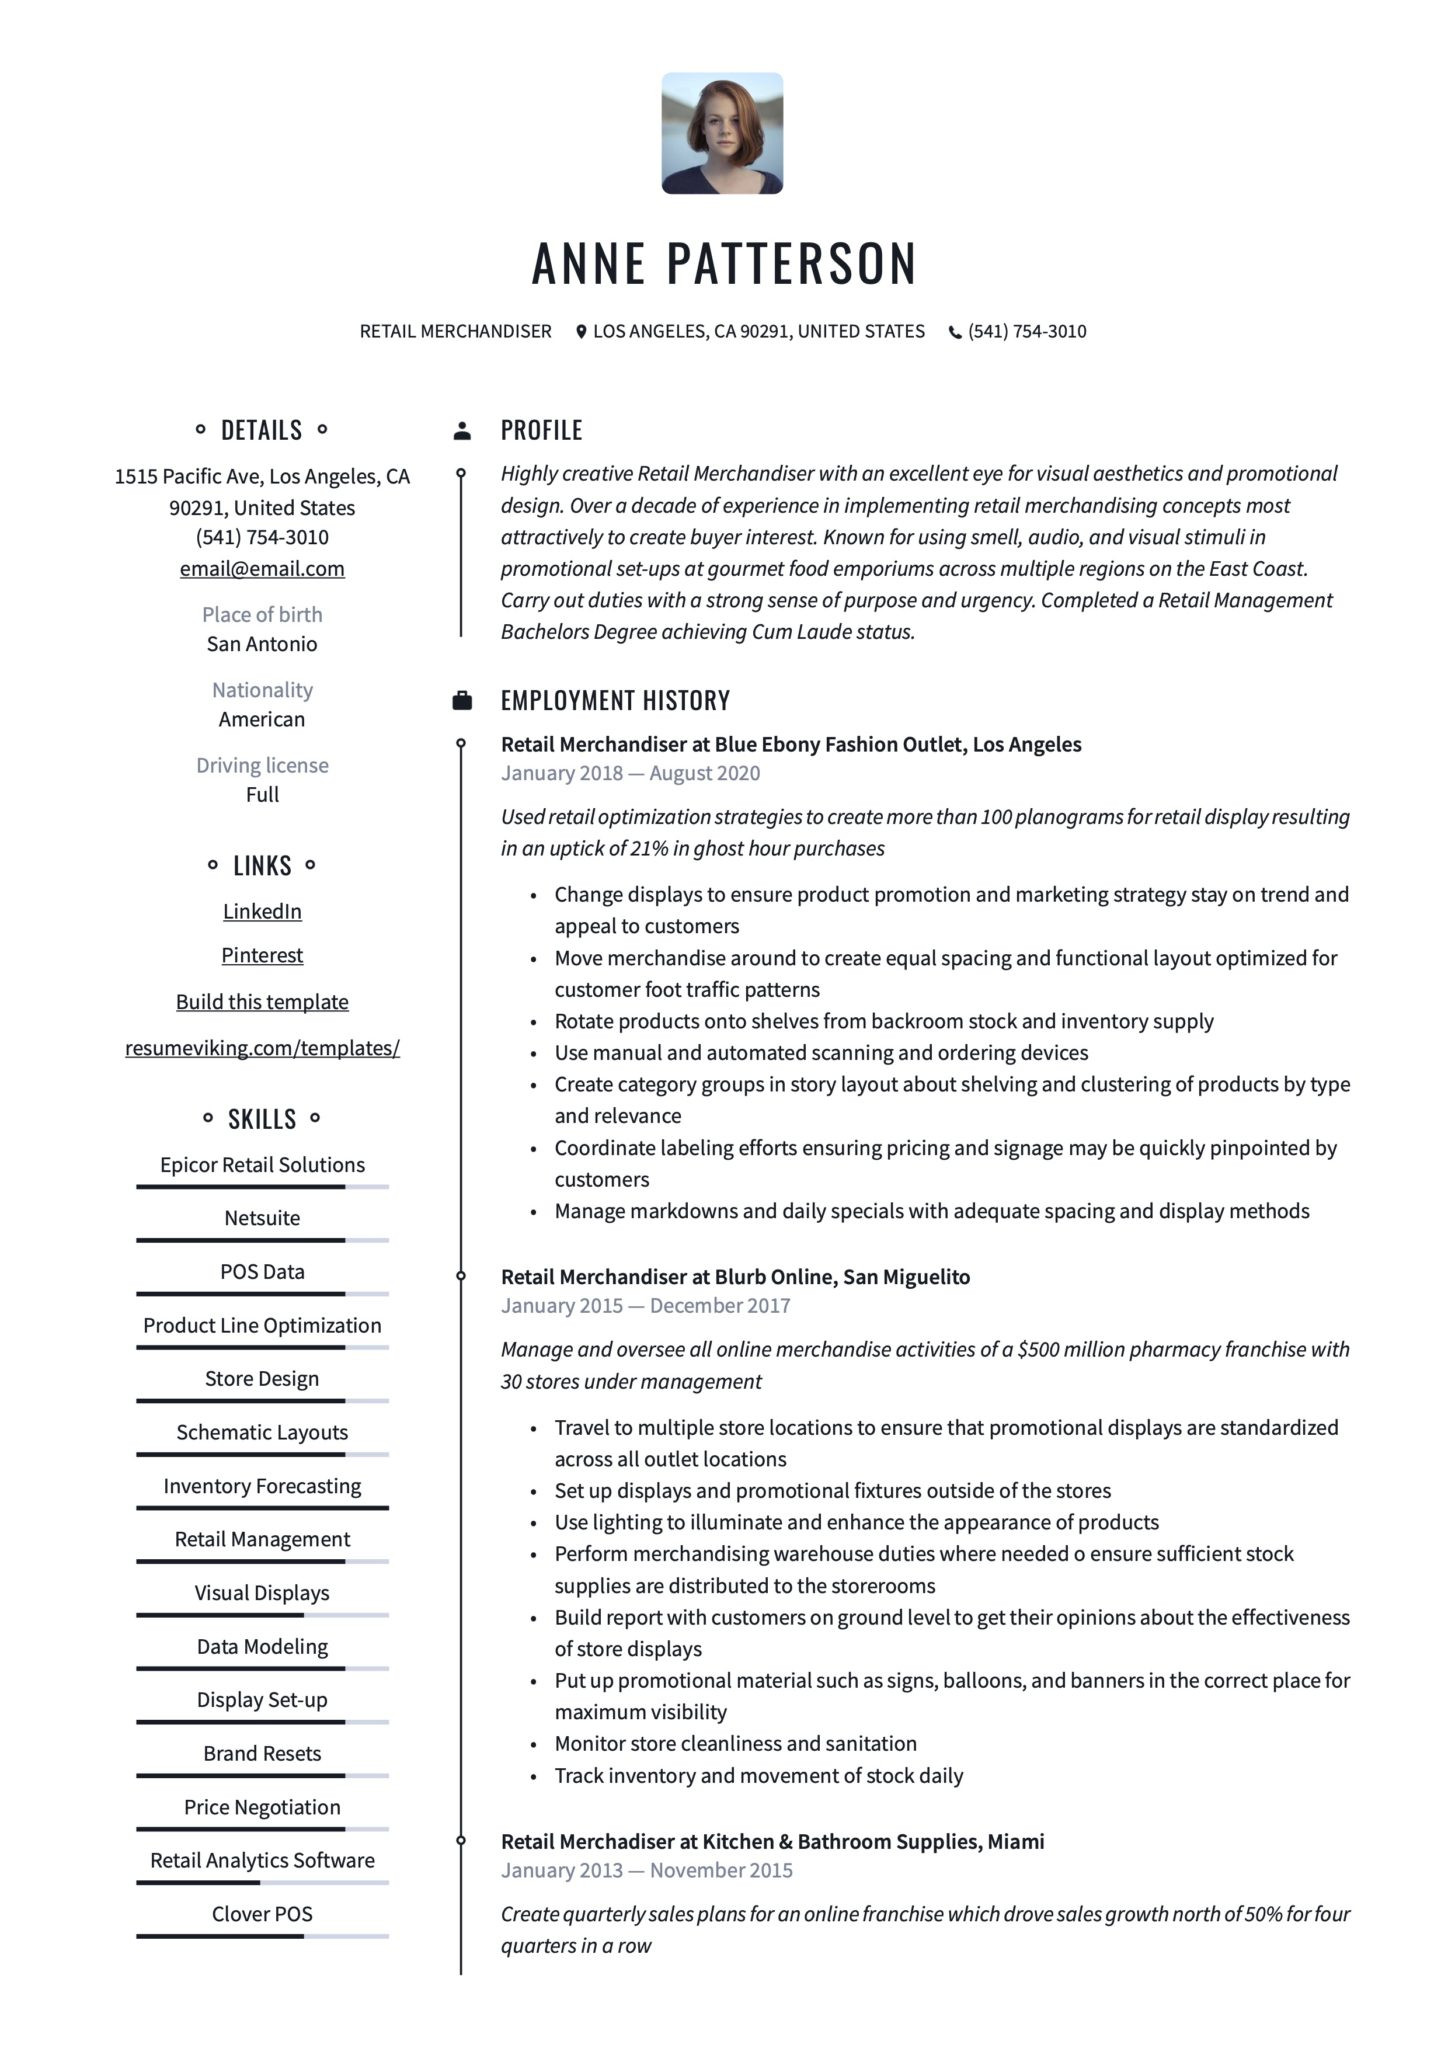 Resume for Retail Luxury Stores Samples 18 Years Old Retail Merchandiser Resume & Writing Guide  17 Templates